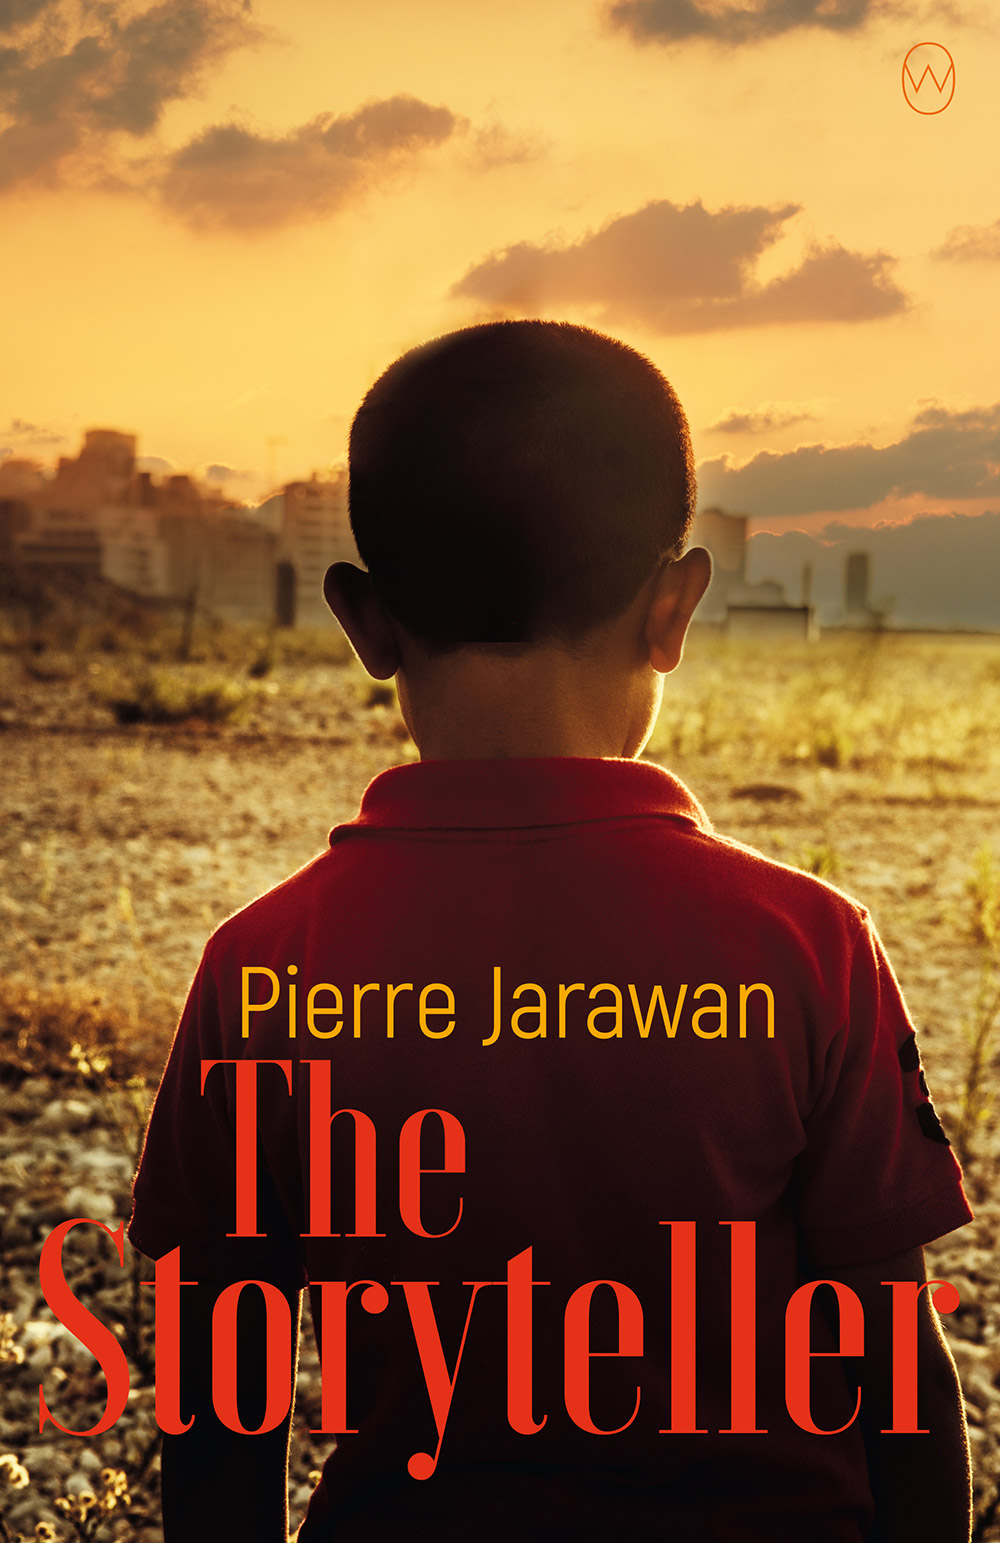 Cover of Pierre Jarawanʹs "The Storyteller" (published by World Editions)